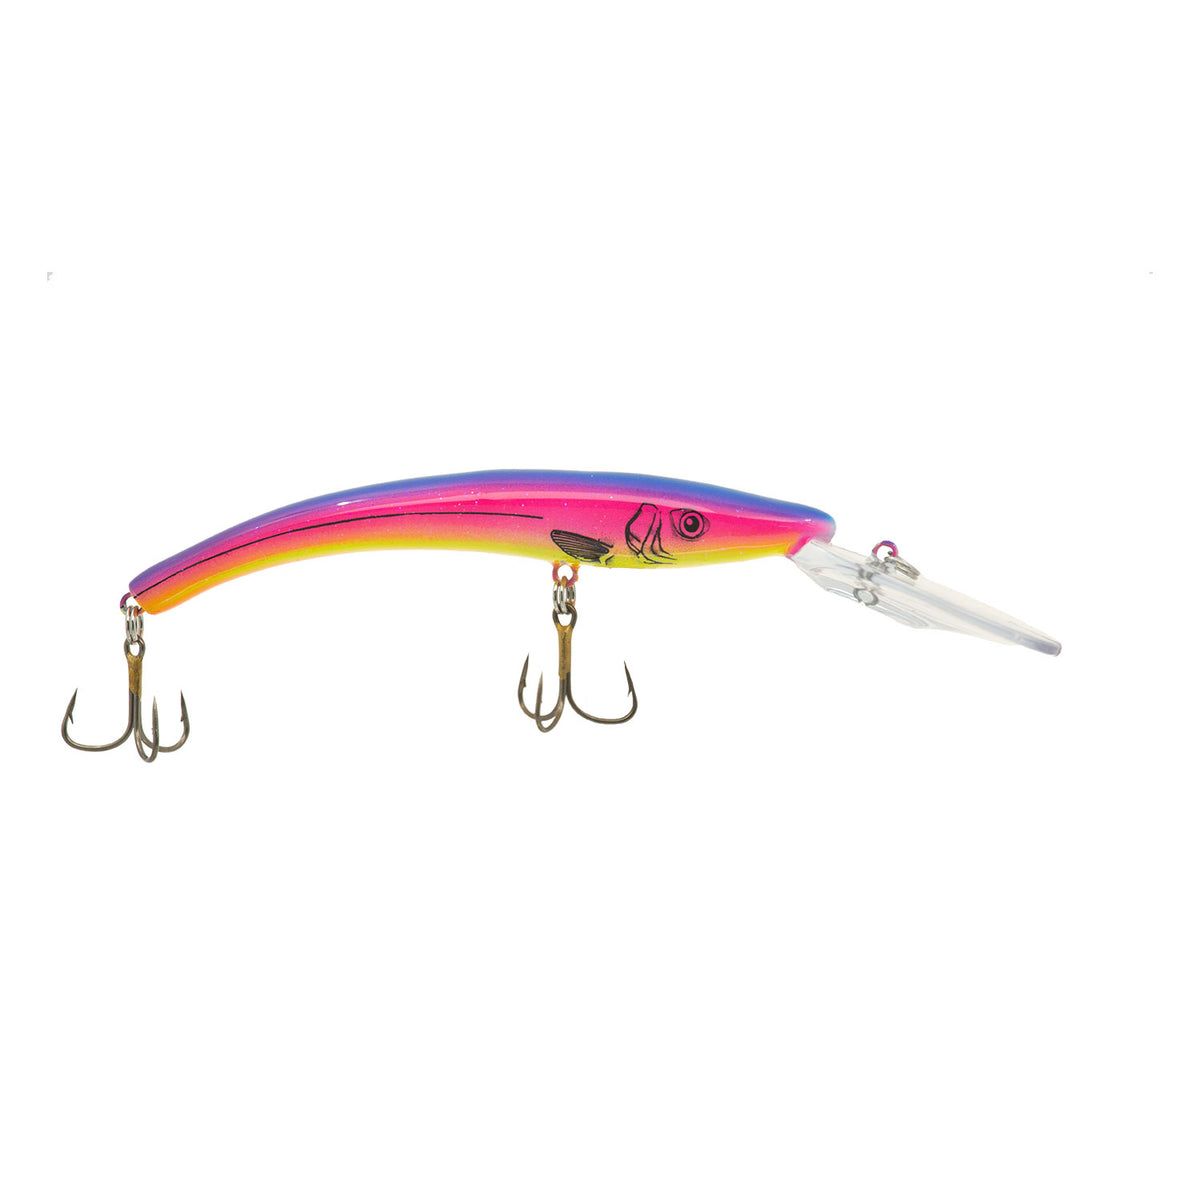 diving fishing lures, diving fishing lures Suppliers and